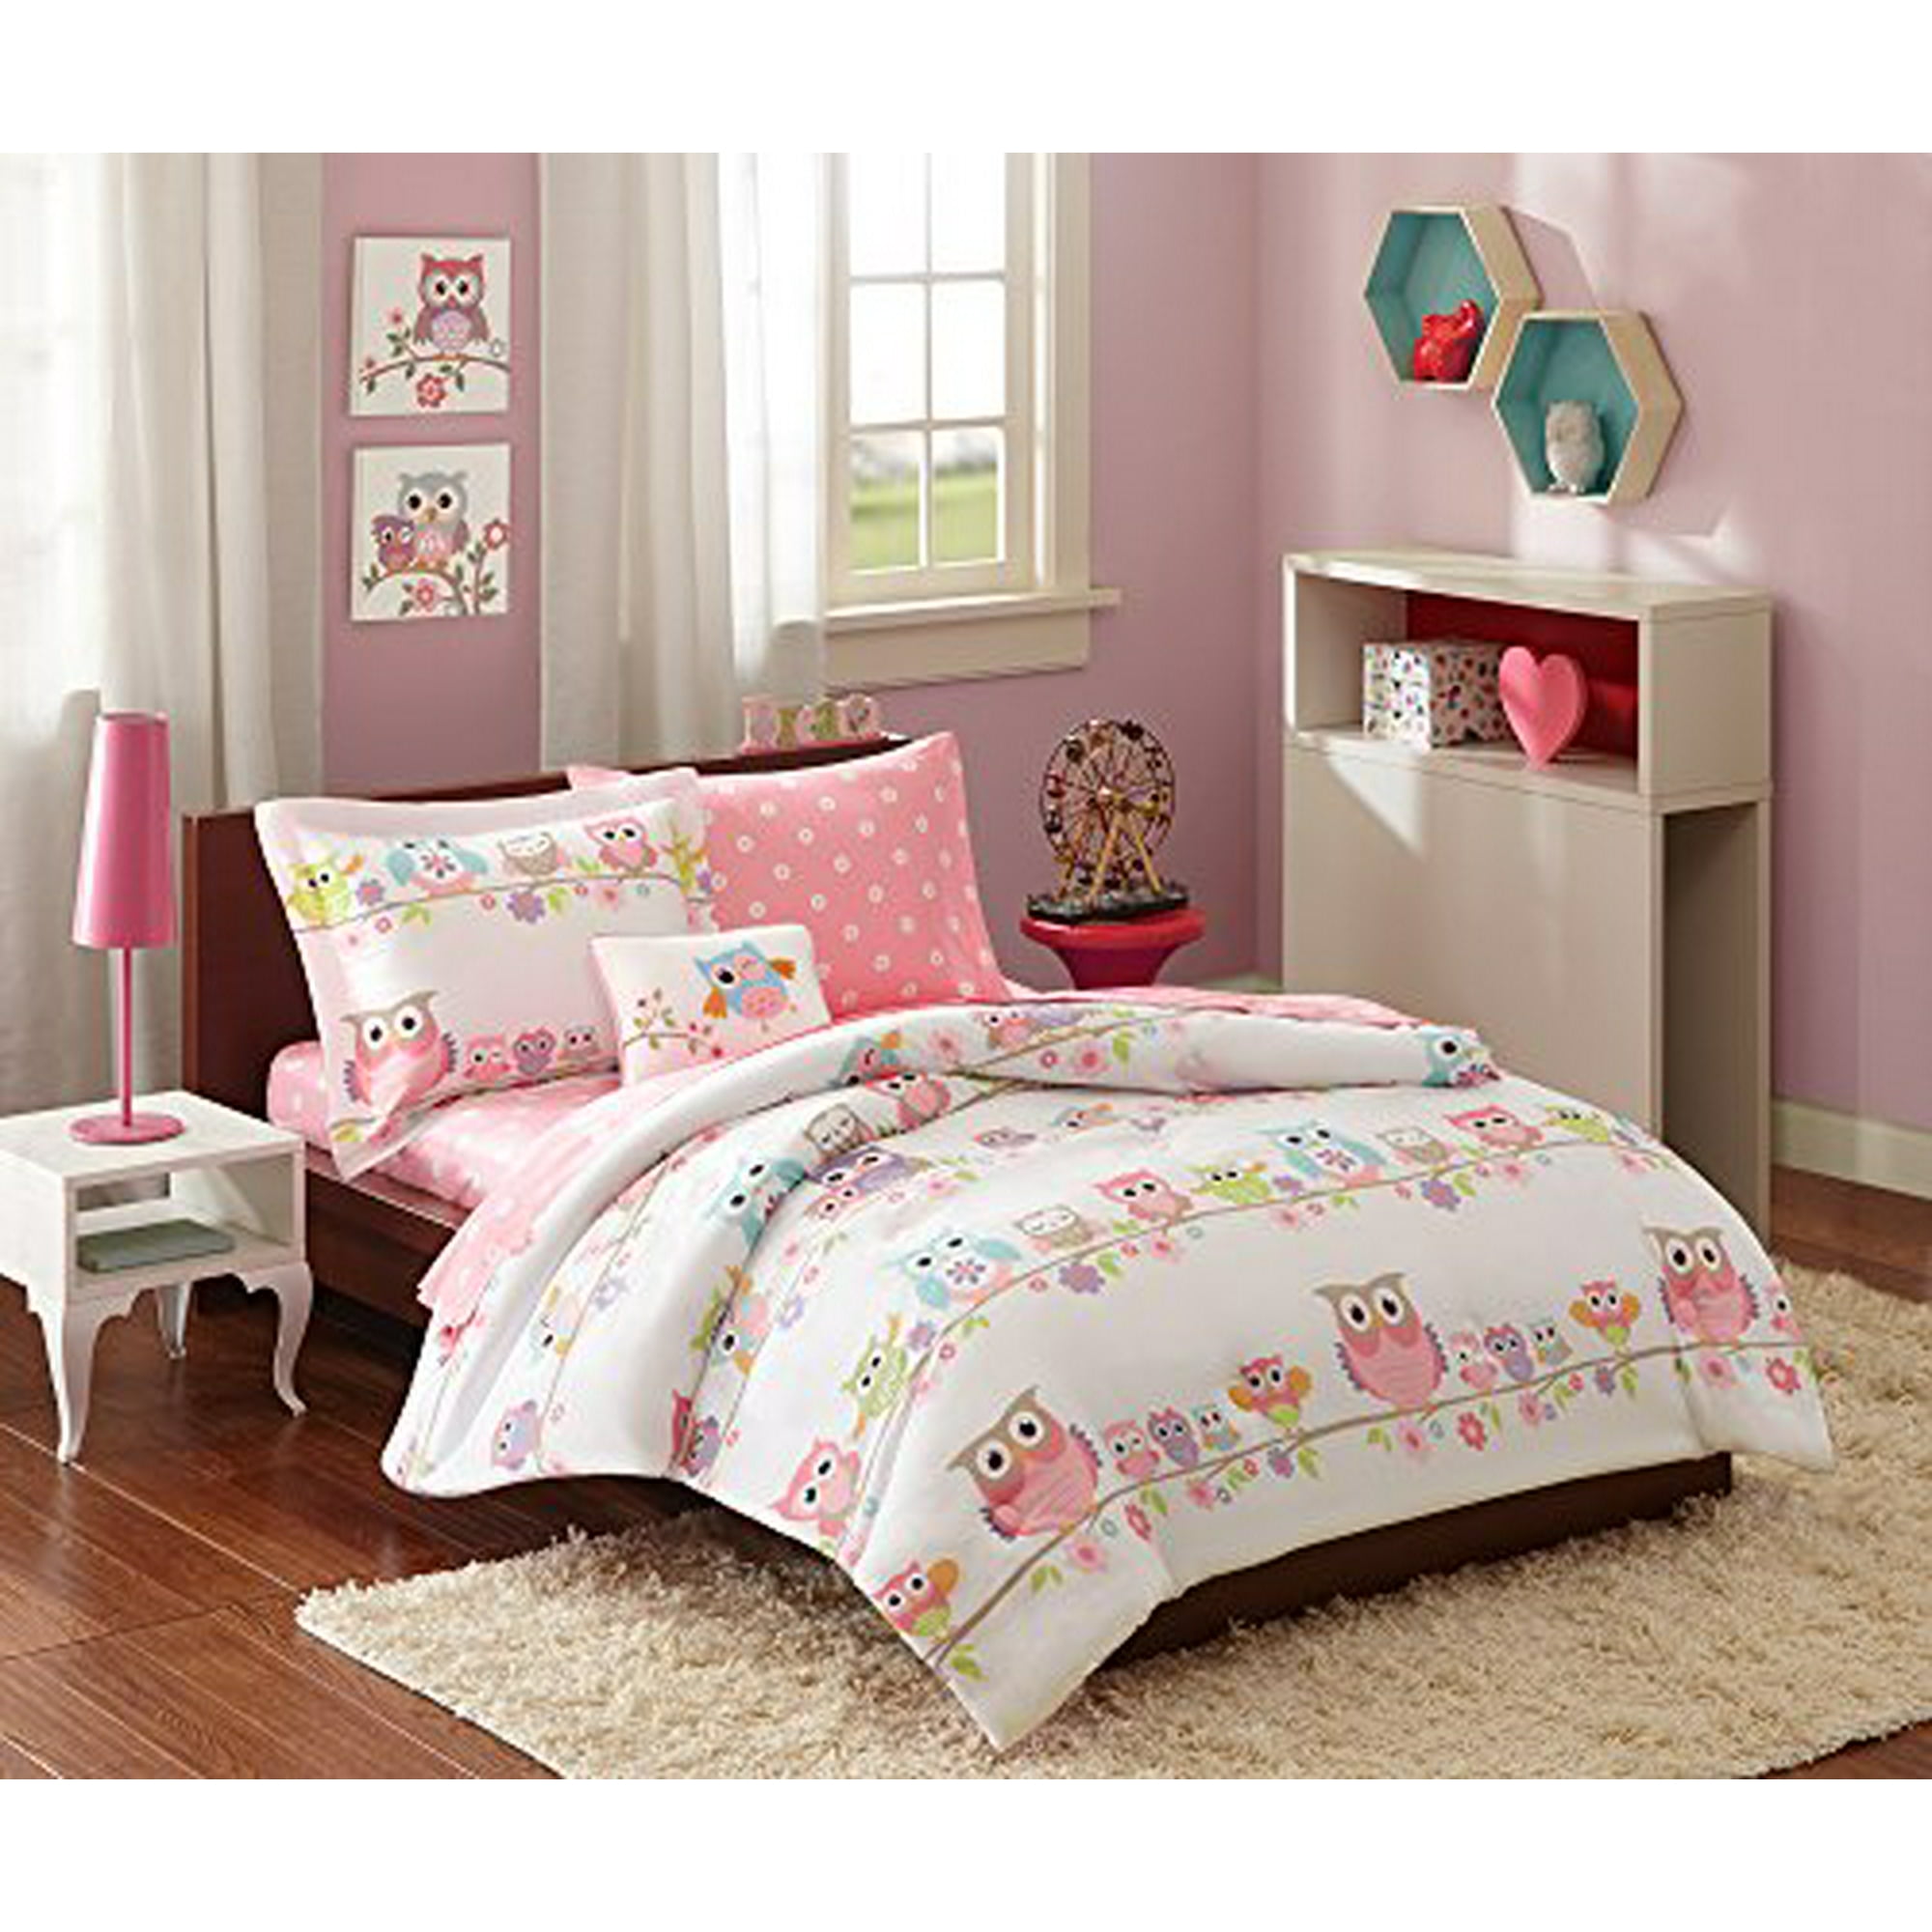 Mi Zone Kids Wise Wendy Queen Comforter Sets For Girls Pink Owl A 8 Pieces Kids Girl Bedding Set A Ultra Soft Microfiber Childrens Bedroom Bed Comforters Walmart Canada